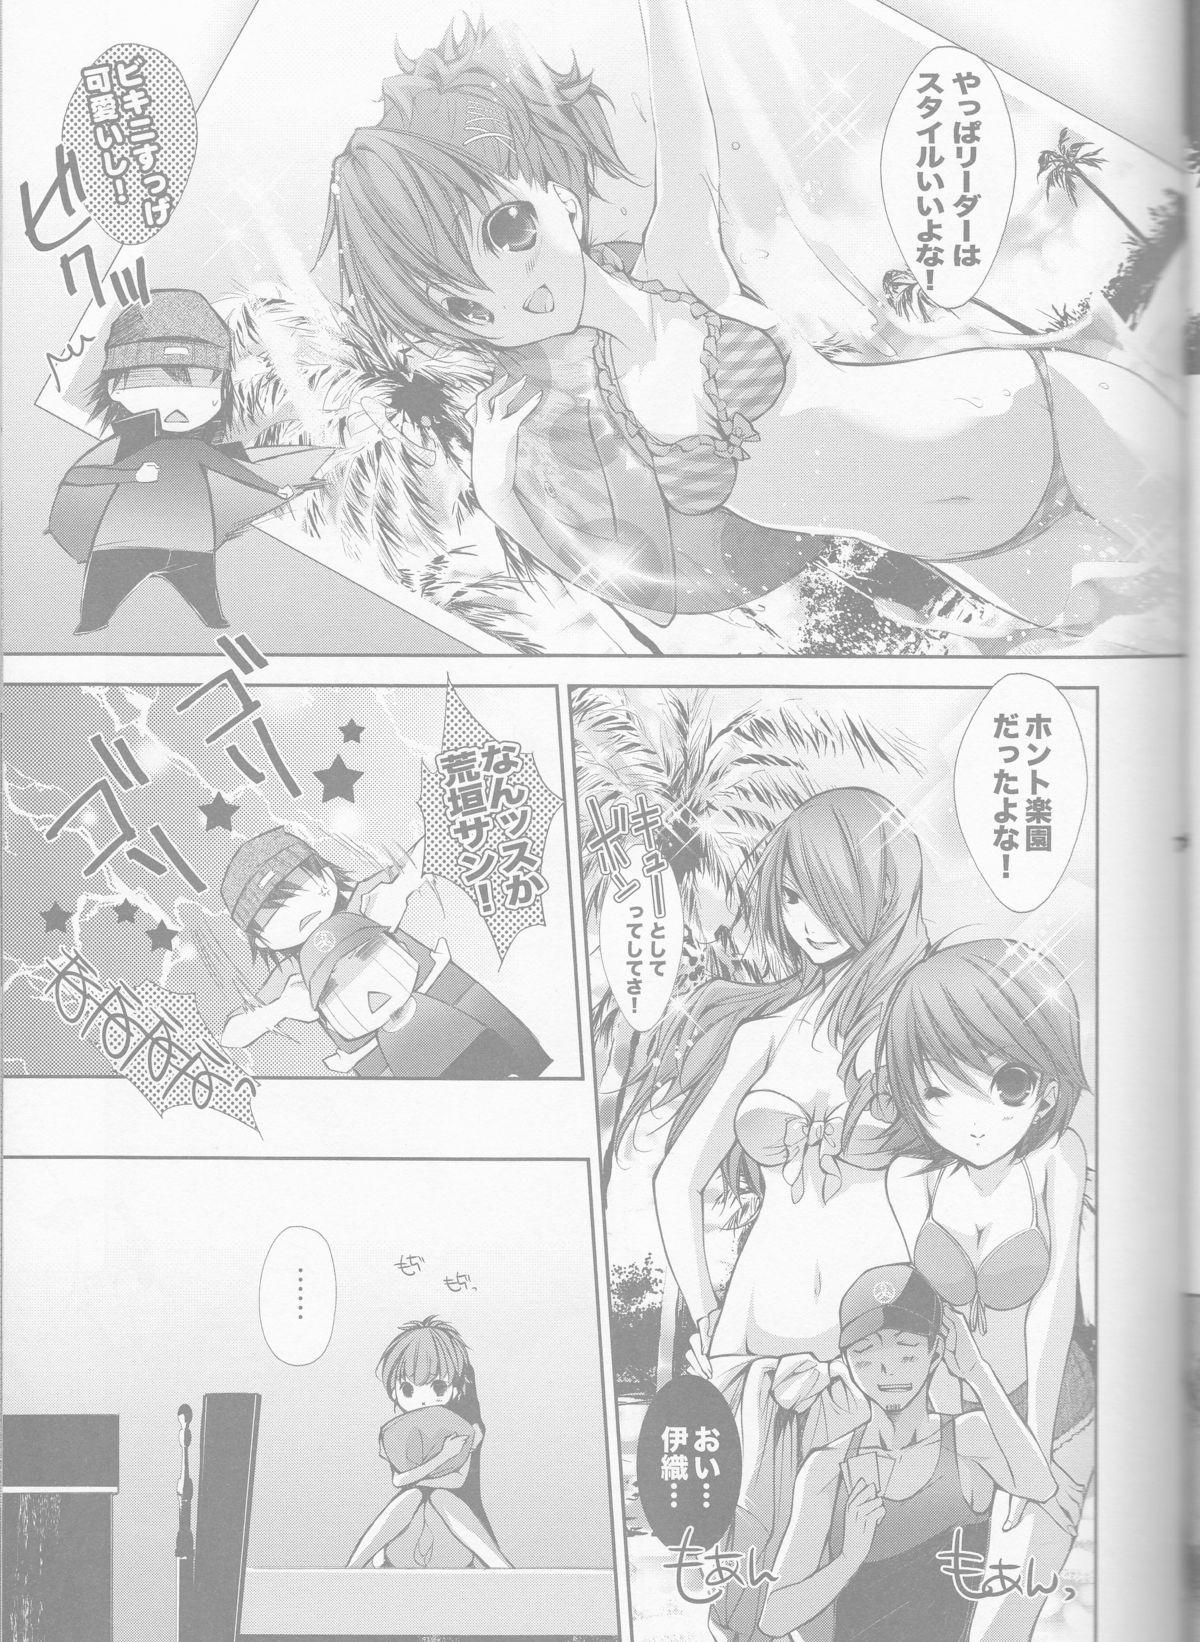 Stockings Telephone LOVE - Persona 3 Village - Page 7